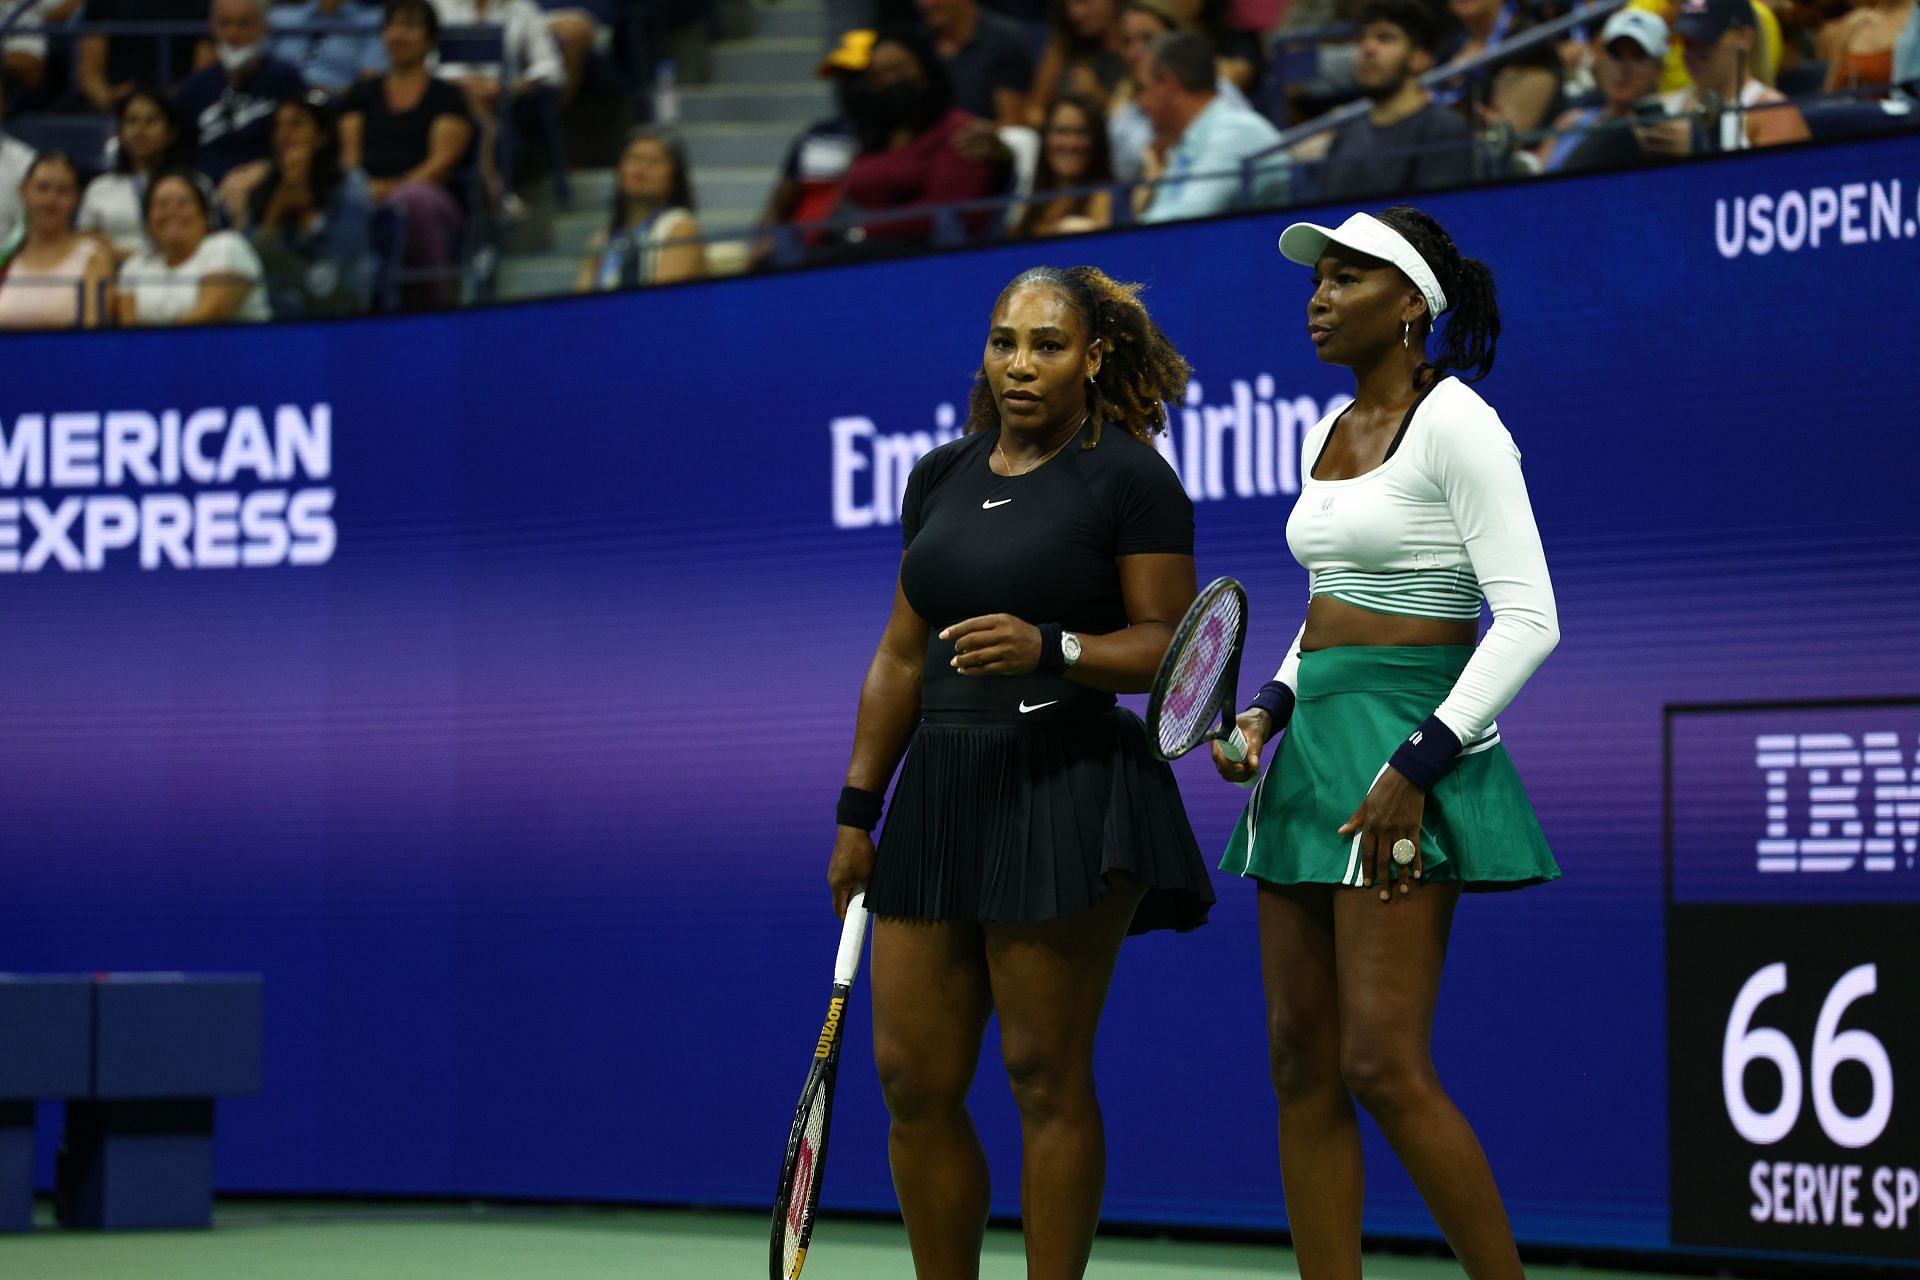 Serena Williams and Venus Williams during their first-round match against Lucie Hradecka and Linda Noskova at the 2022 US Open - Day 4